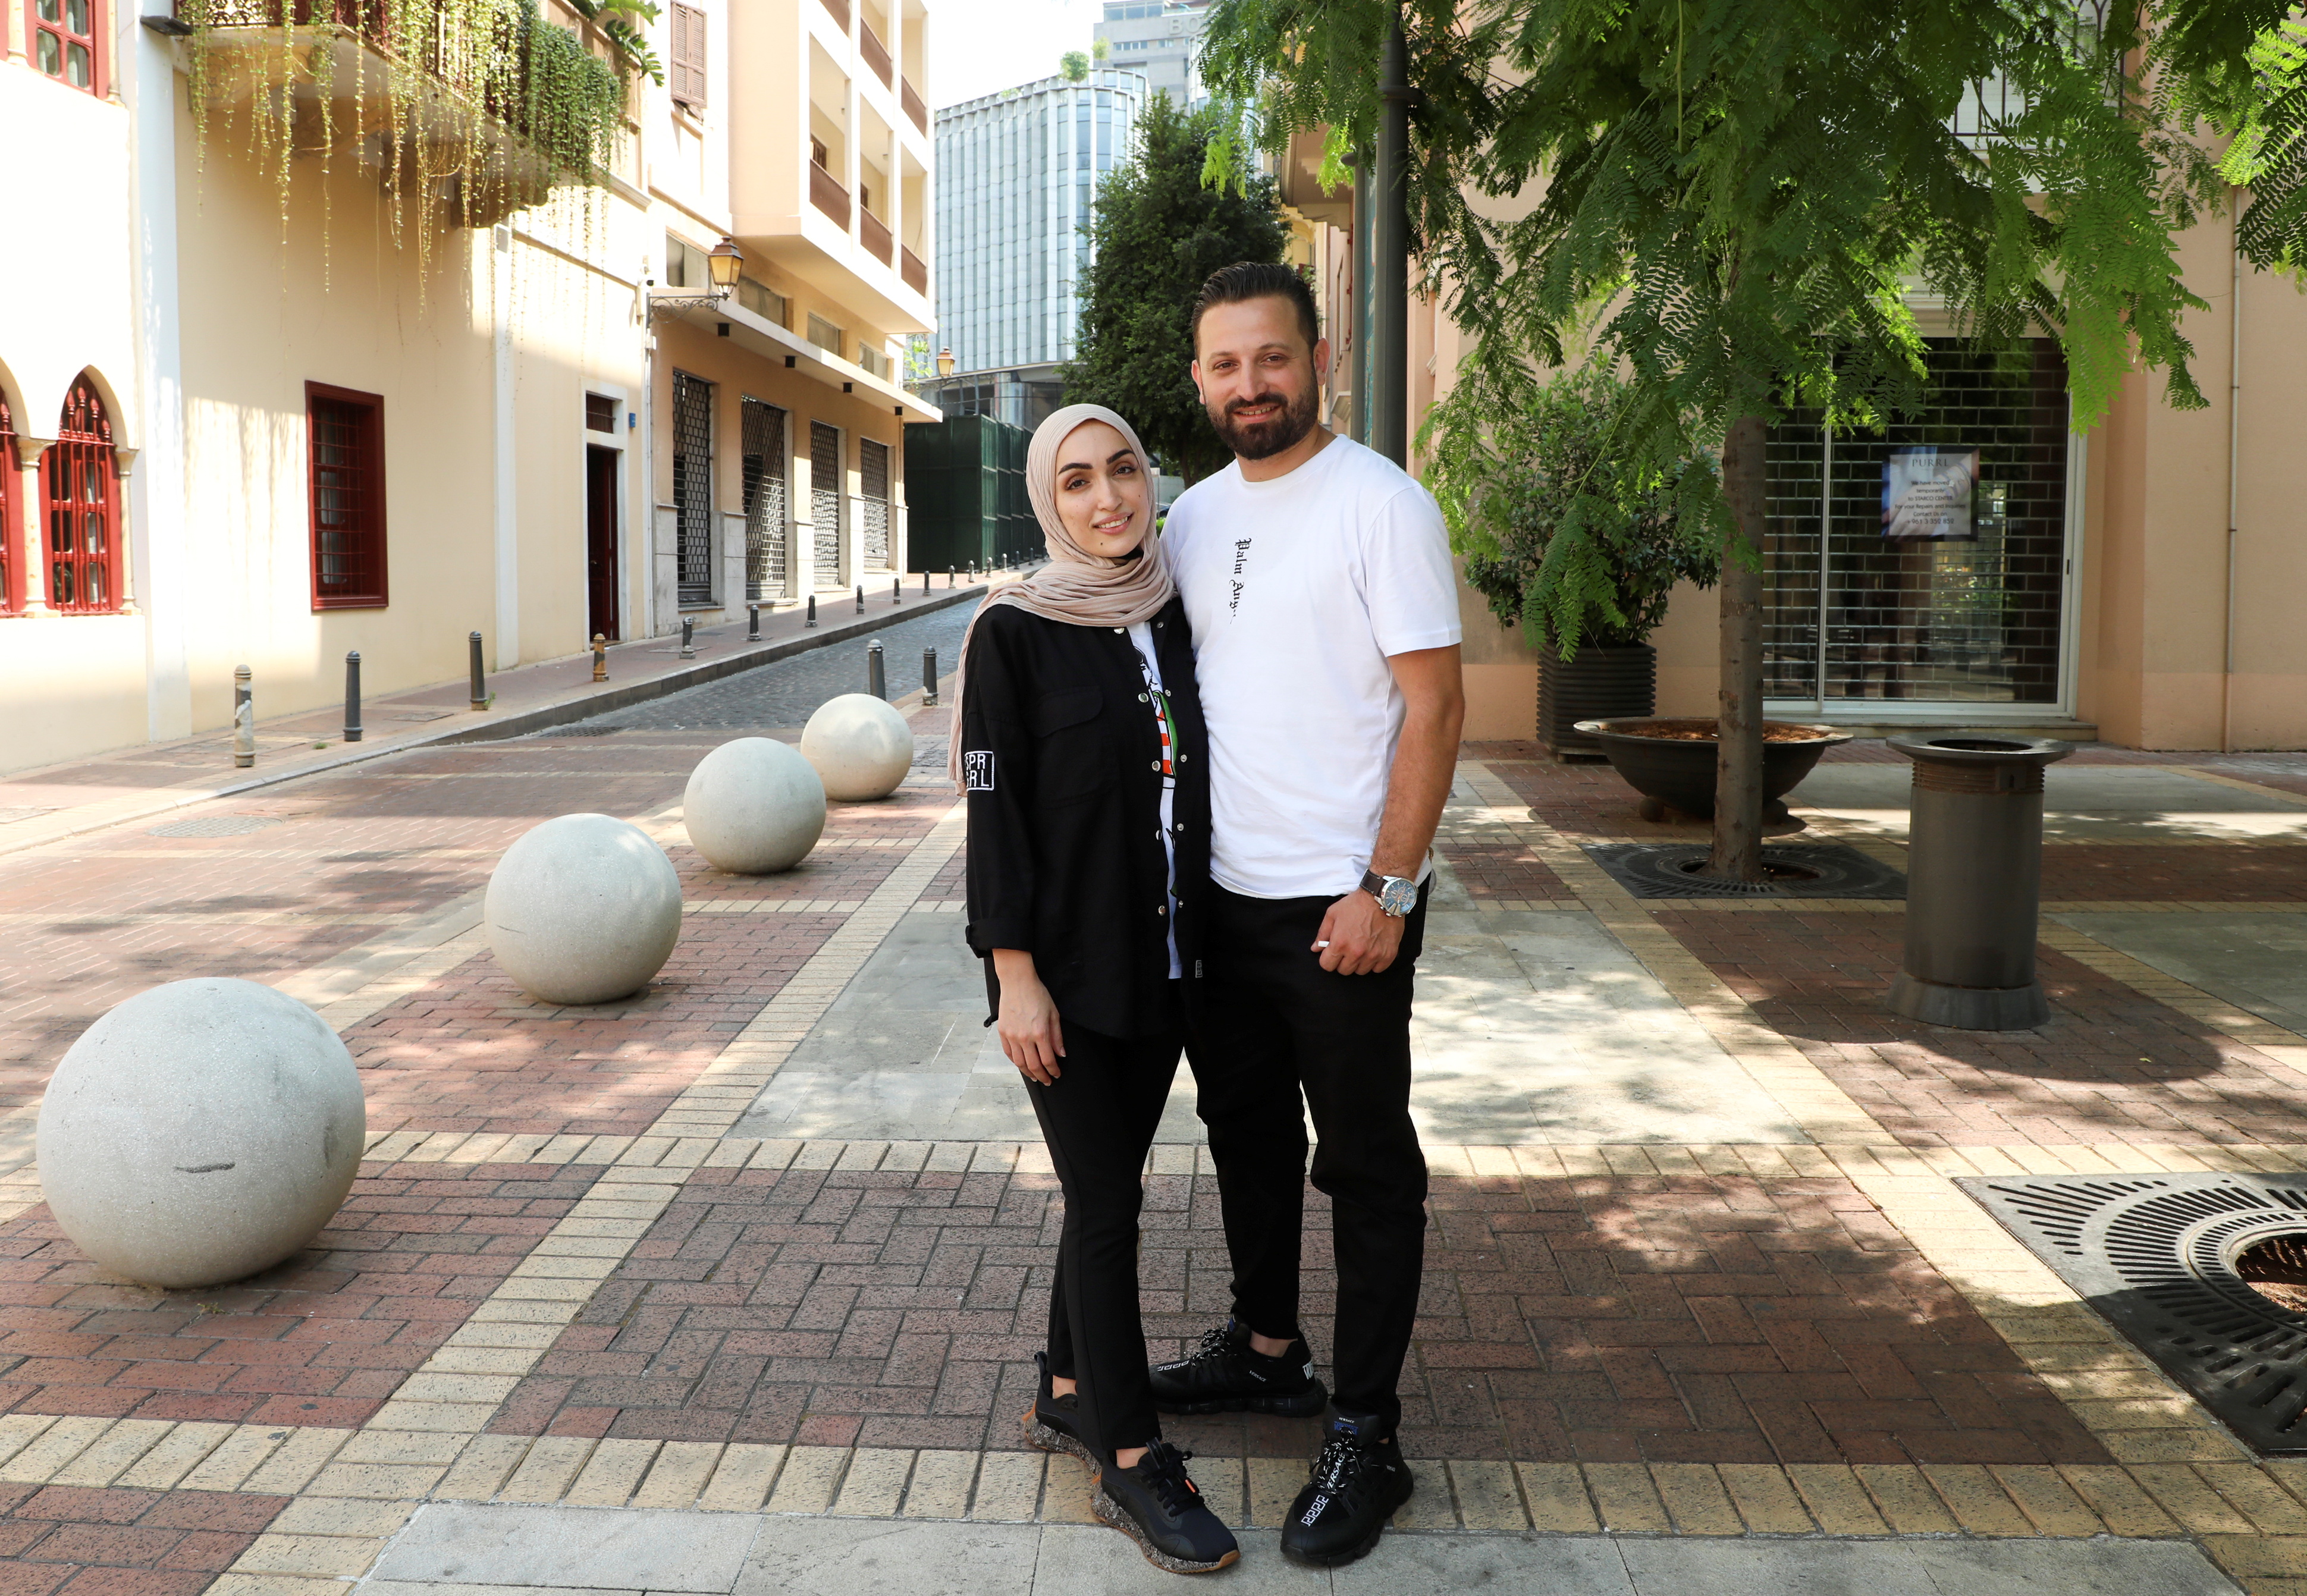 Israa Seblani, a Lebanese doctor and the bride who was caught up in the last year's Beirut port blast during a wedding photoshoot, poses for a picture with her husband Ahmad Subeih